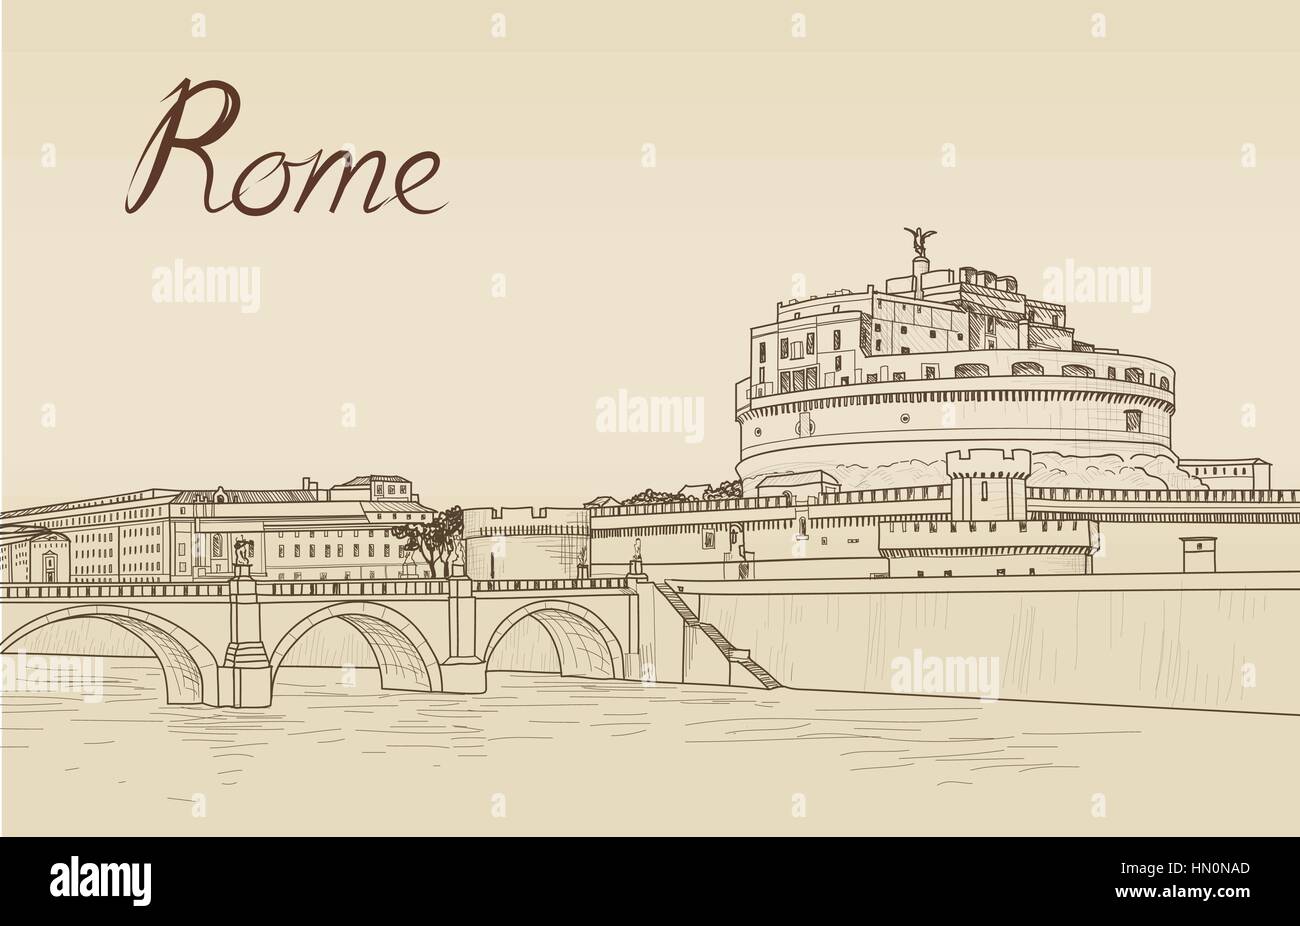 Rome cityscape with Castle Sant Angelo. Italian city famous landmark skyline. Travel Italy engraving. Rome architectural city background with letterin Stock Vector